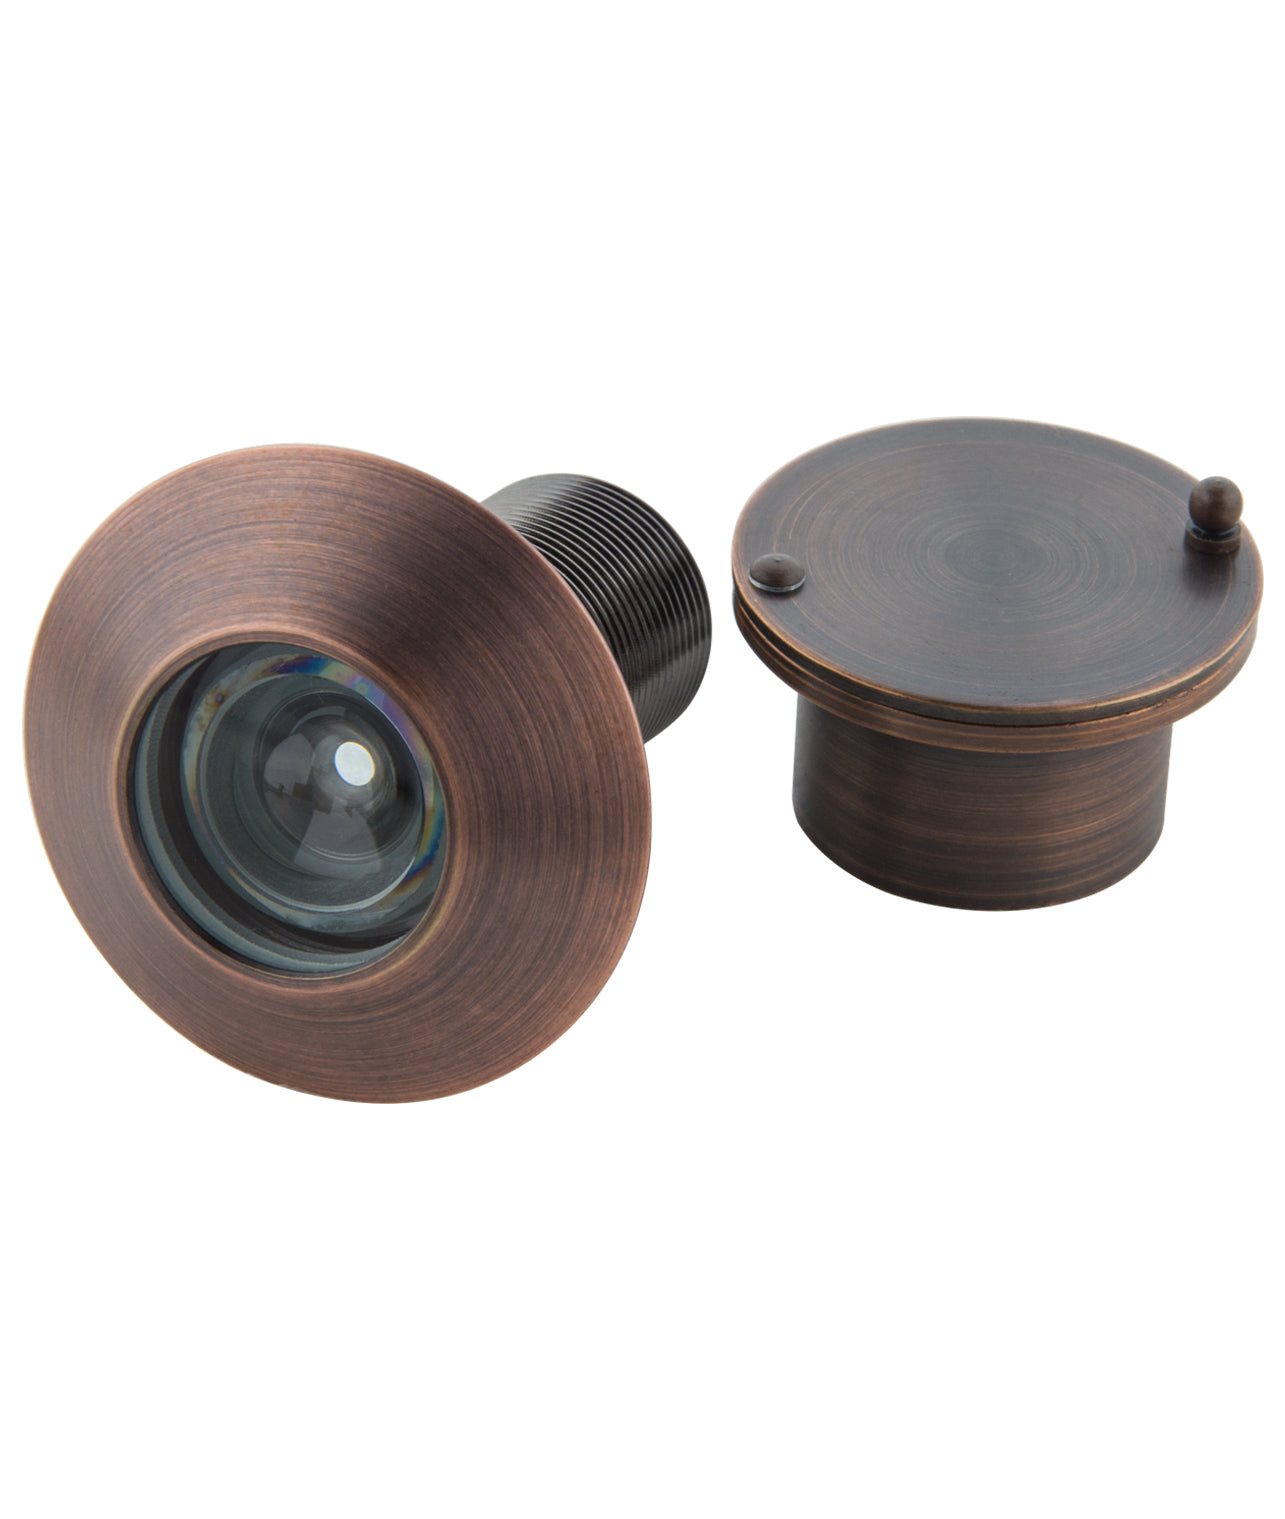 Solid Brass Security Large Peepholes for Front Door - Oil Rubbed Bronze